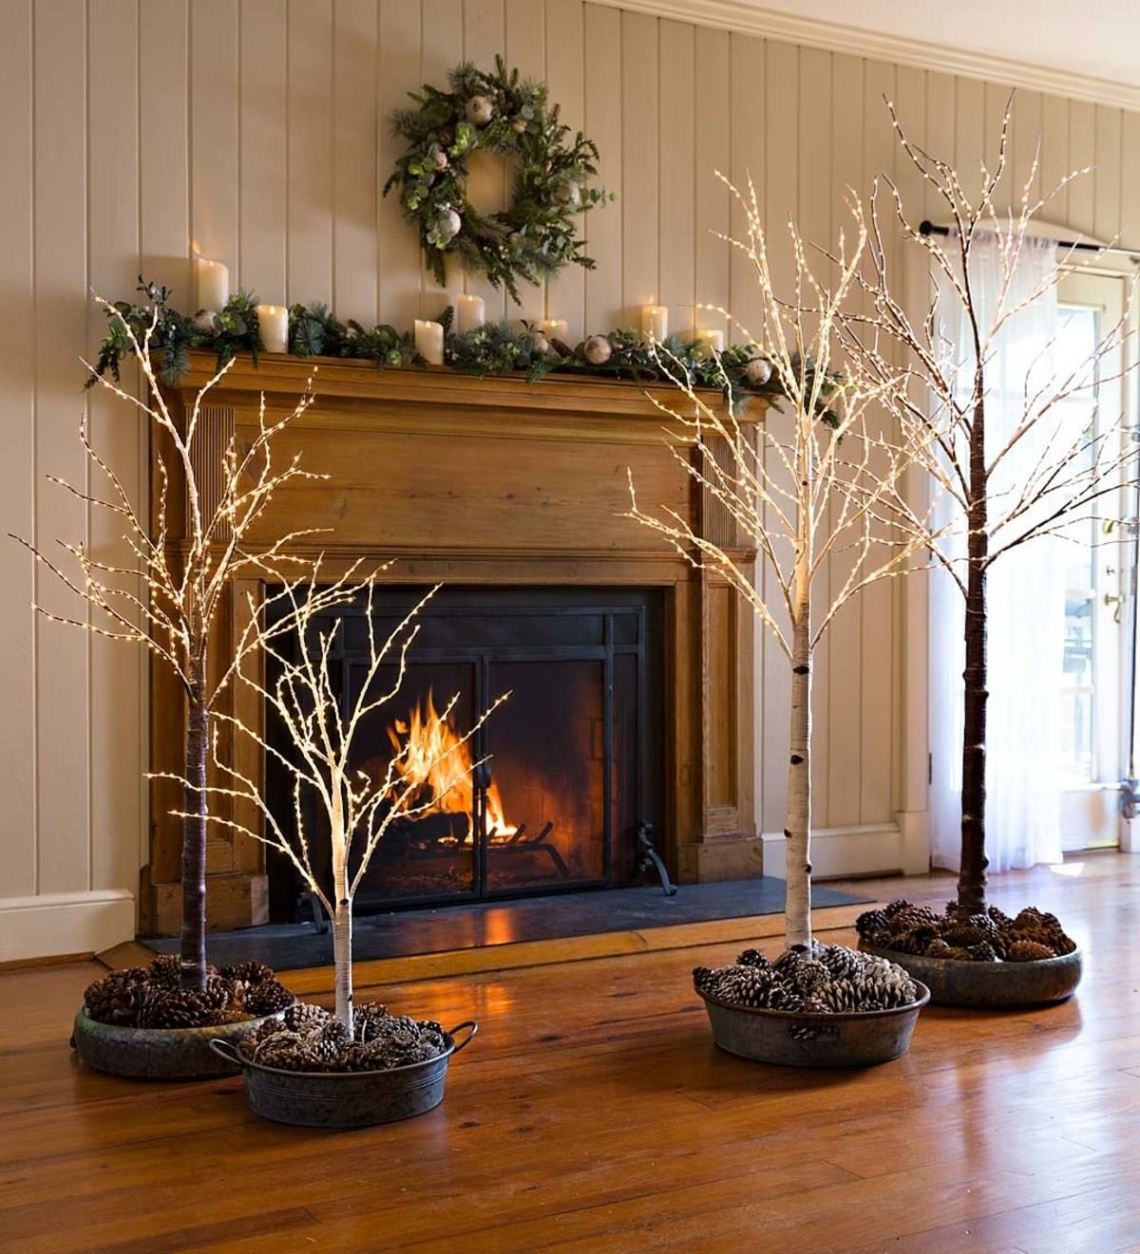 birch tree decorating ideas Bulan 5 Our Indoor/Outdoor Lighted Birch Tree makes an stunning accent in